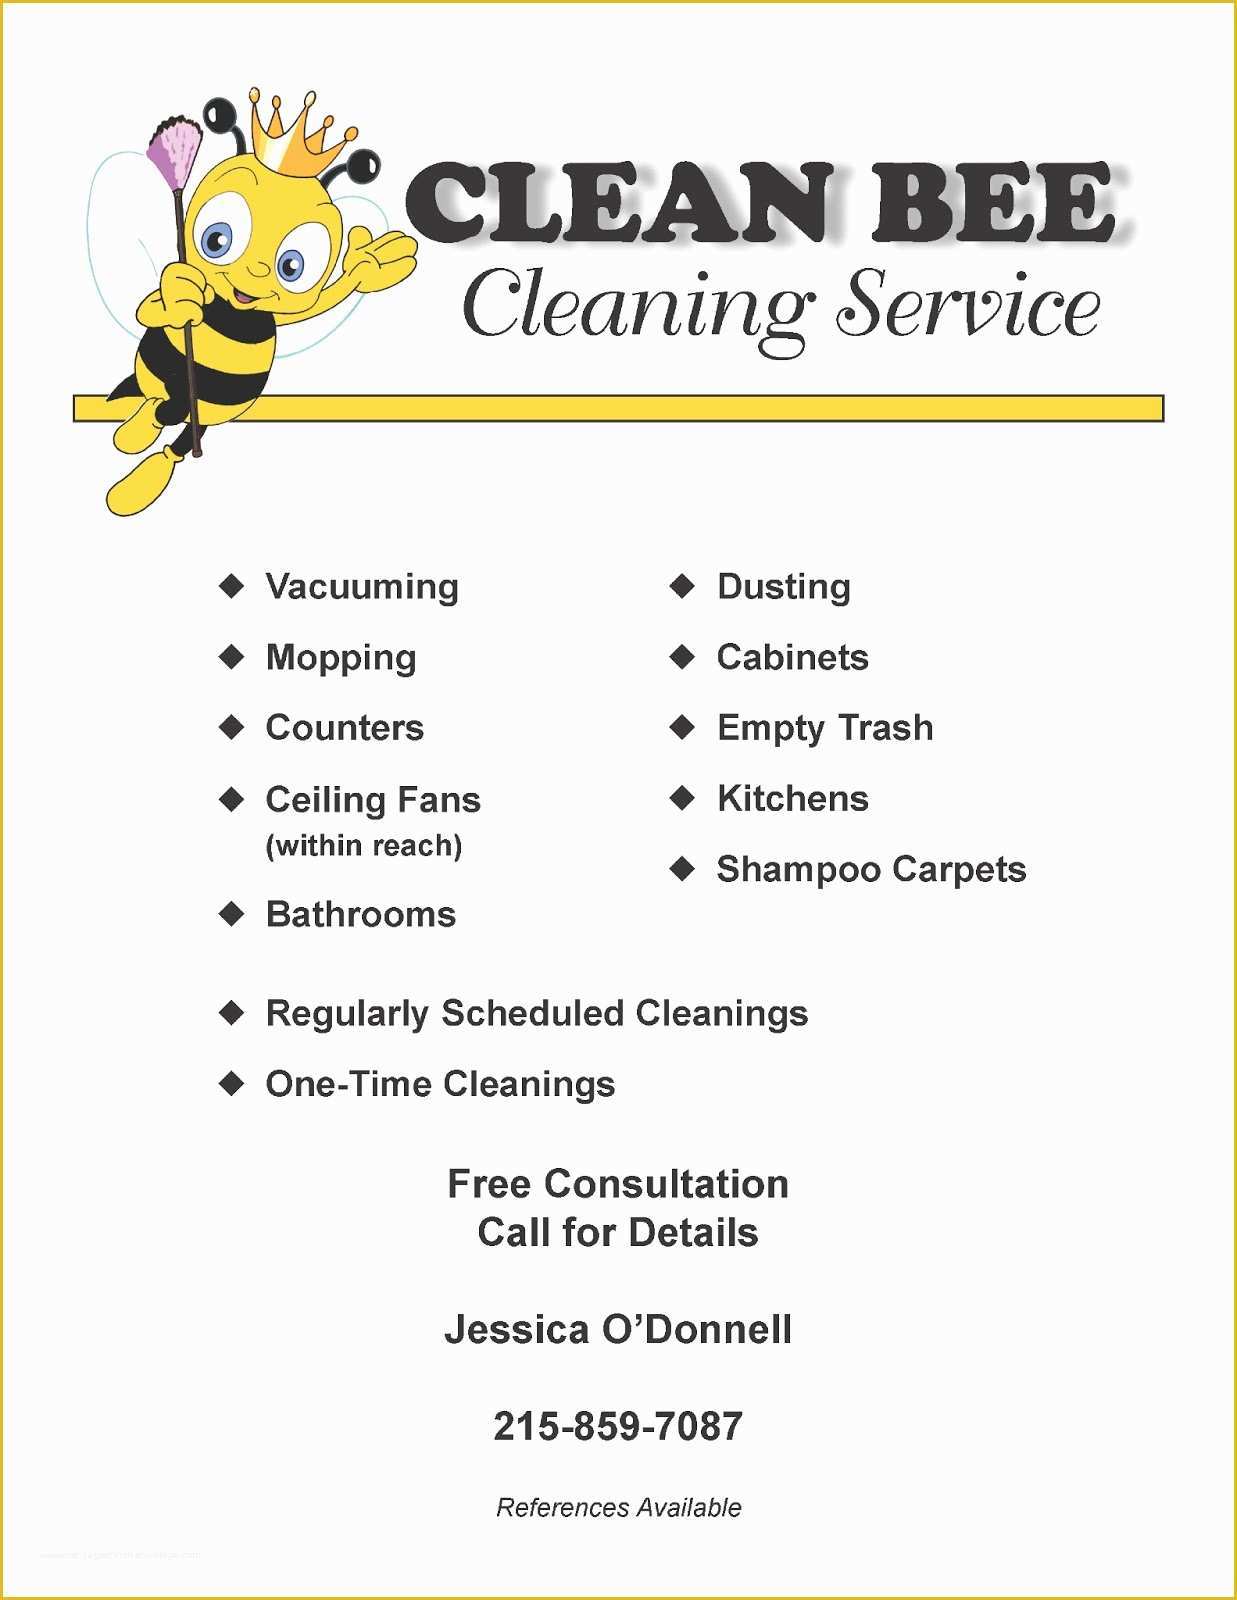 Cleaning Service Flyer Template Free Of Kitelinger Designs Cleaning Service Flyer